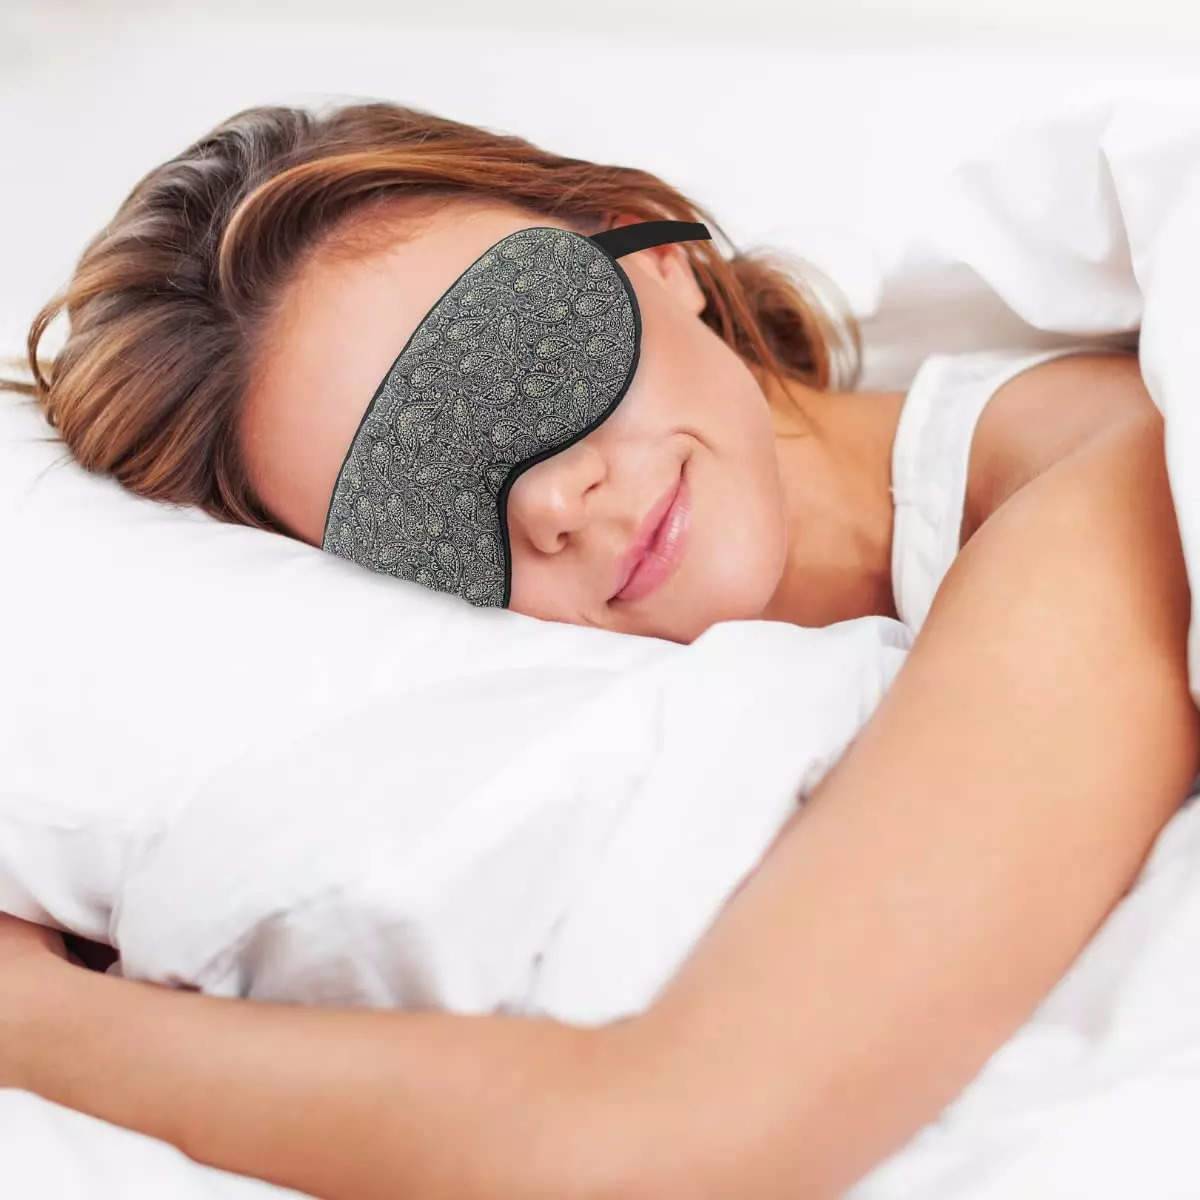 Having difficult in sleep, is sleep mask will help to get sleep for real?